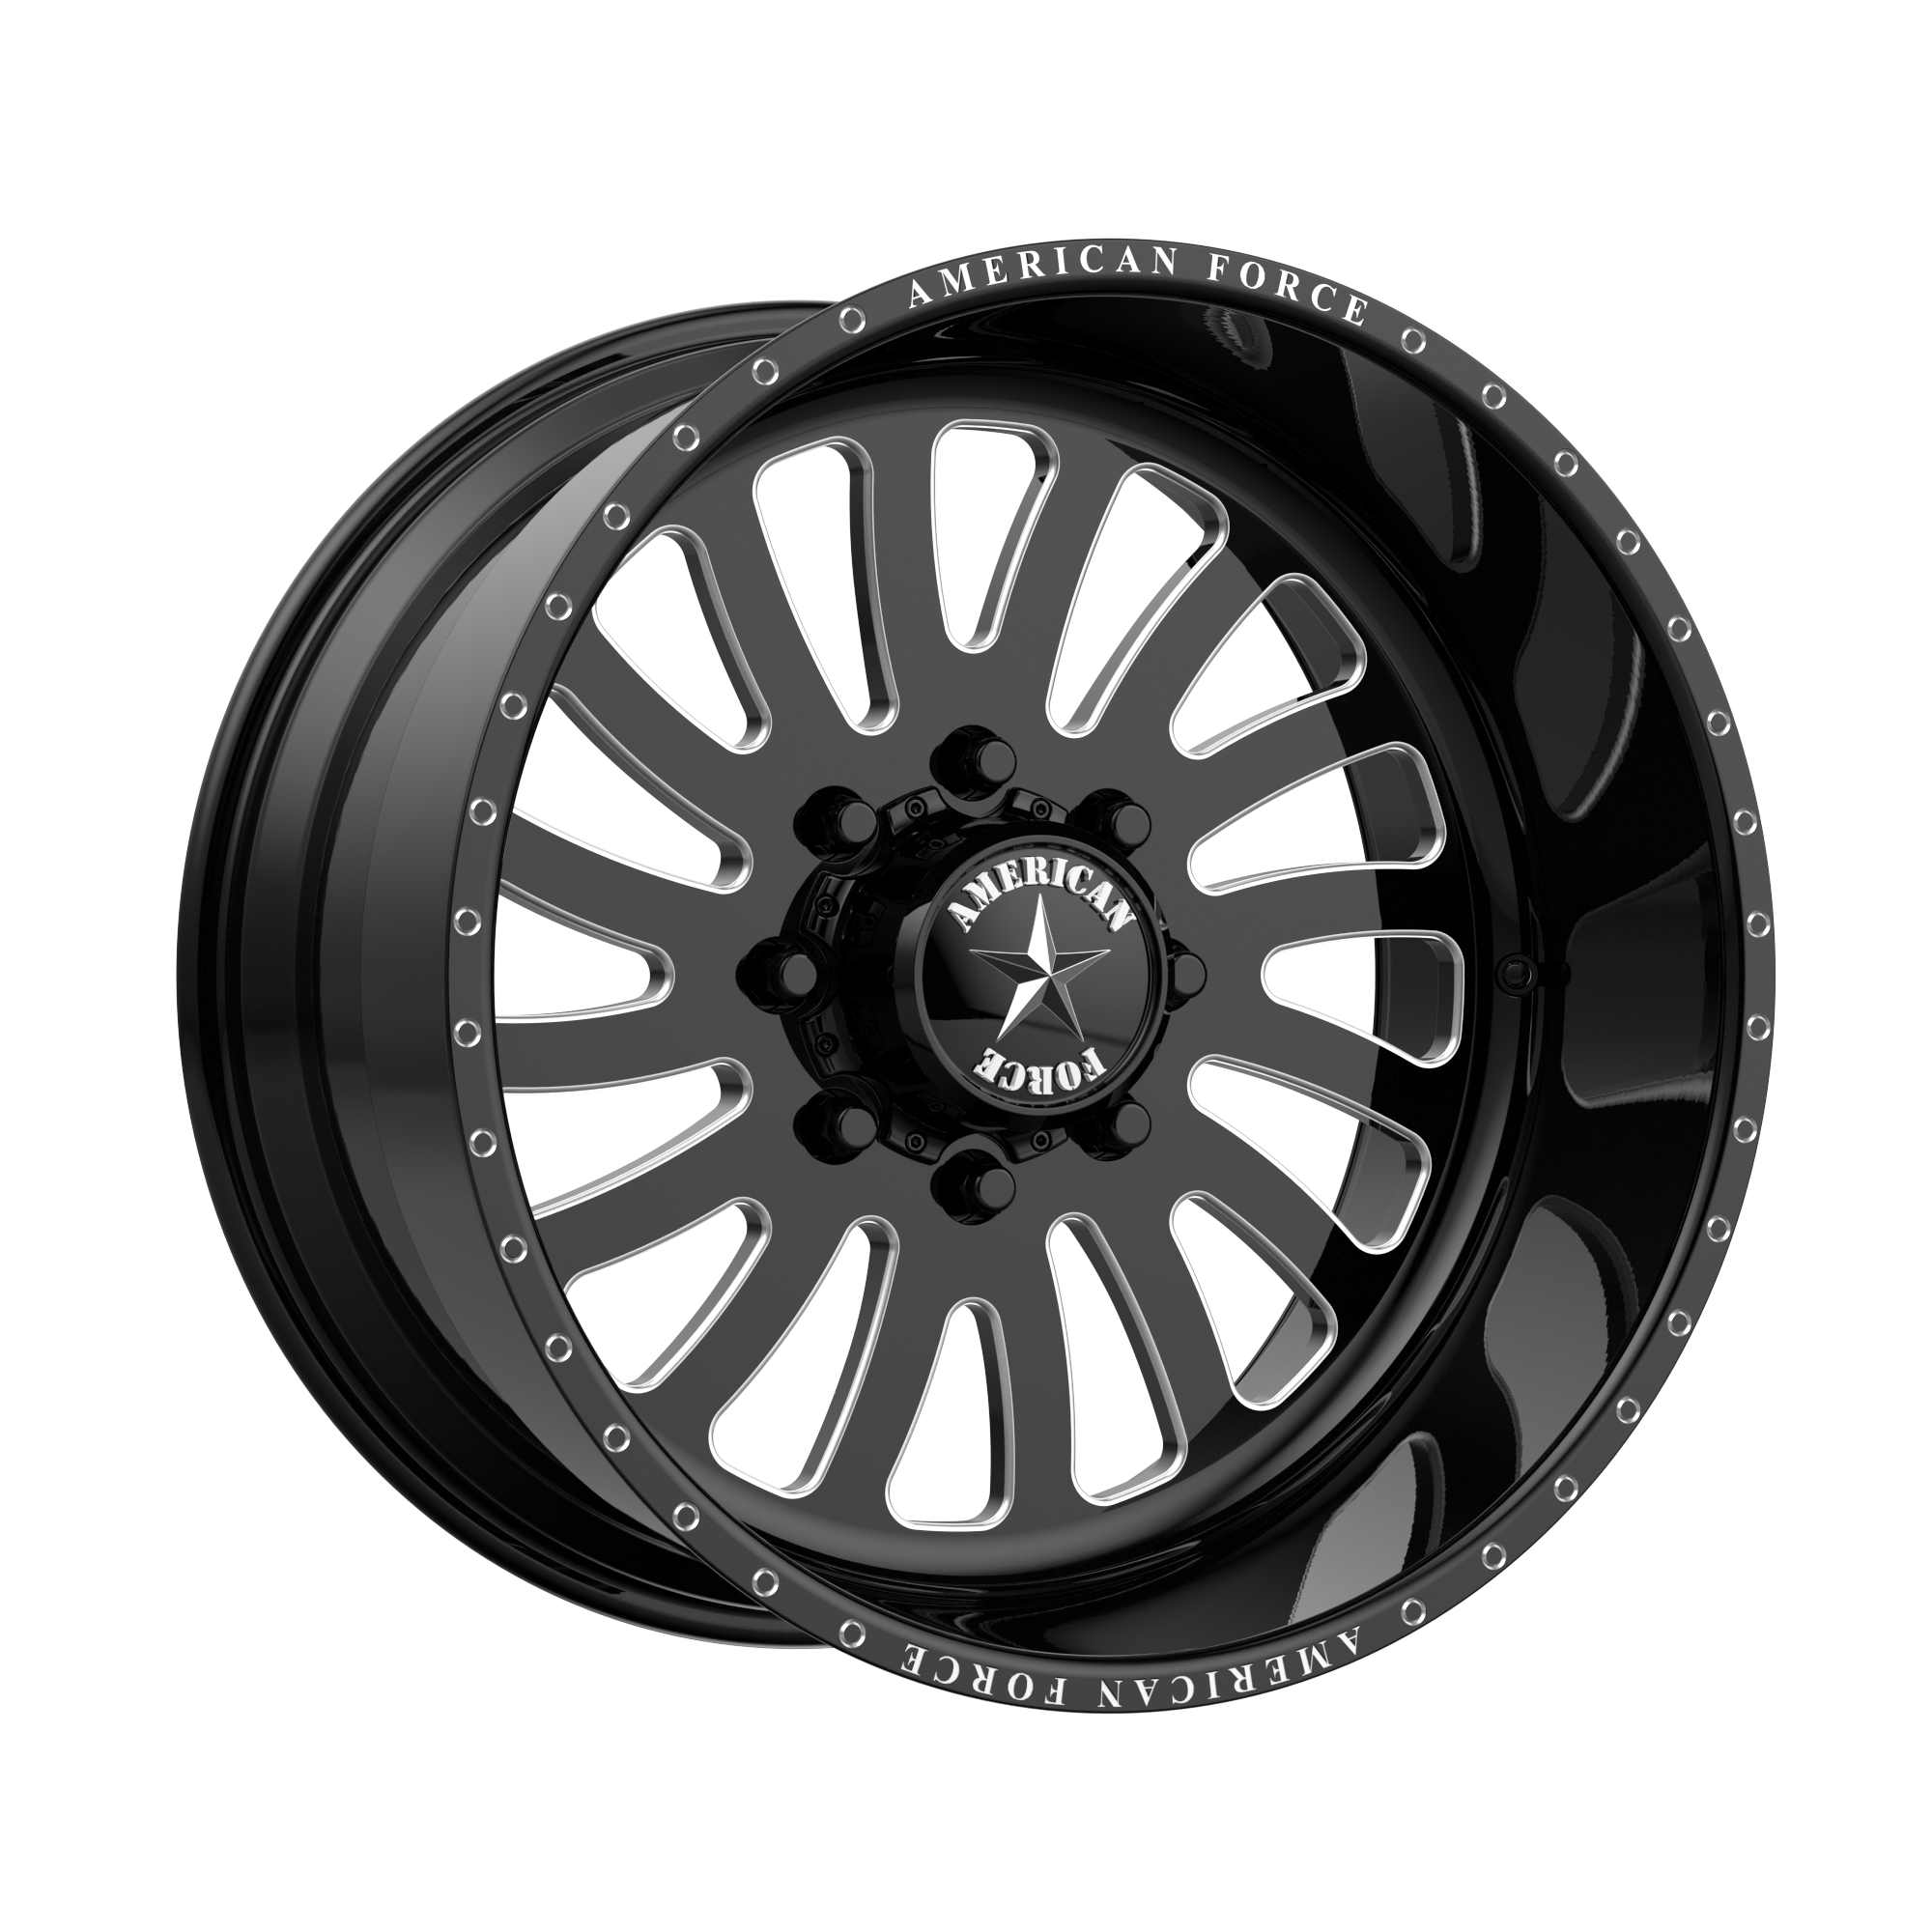 OCTANE SS 20x14 8x165.10 GLOSS BLACK MACHINED (-73 mm) - Tires and Engine Performance